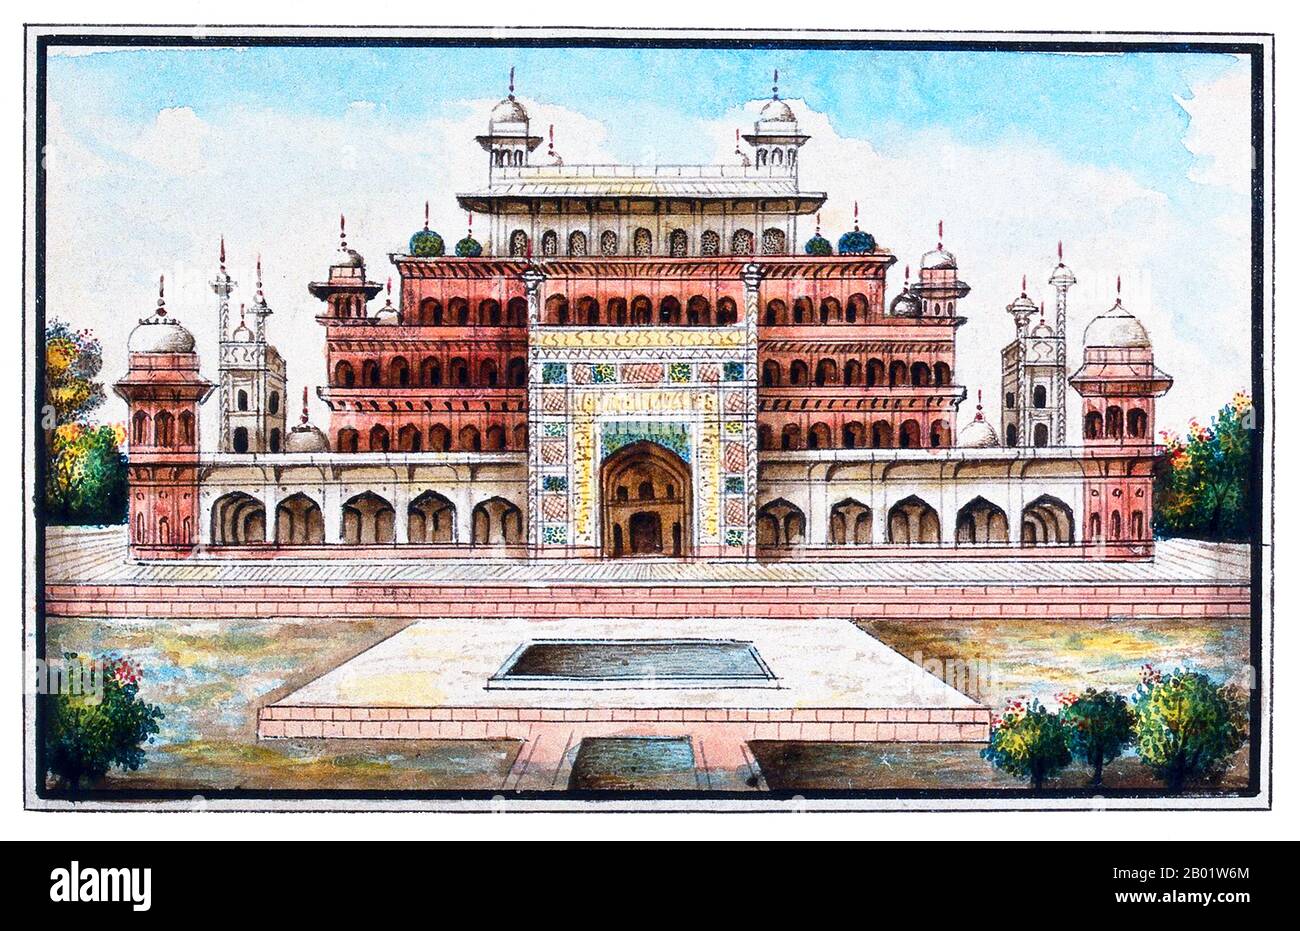 India: The early 17th century mausoleum of Mughal Emperor Akbar. Watercolour painting by the East India Company, 19th century.  The tomb of the the third Mughal Emperor Akbar (r. 1556-1605) is an important Mughal architectural masterpiece, built 1605-1613 and set in 119 acres of grounds in Sikandra, a suburb of Agra, Uttar Pradesh, India.  Emperor Akbar himself commenced its construction around 1600, according to Central Asian tradition to begin the construction of one's tomb during one's lifetime. Akbar himself planned his own tomb and selected a suitable site. It was completed by his son. Stock Photo